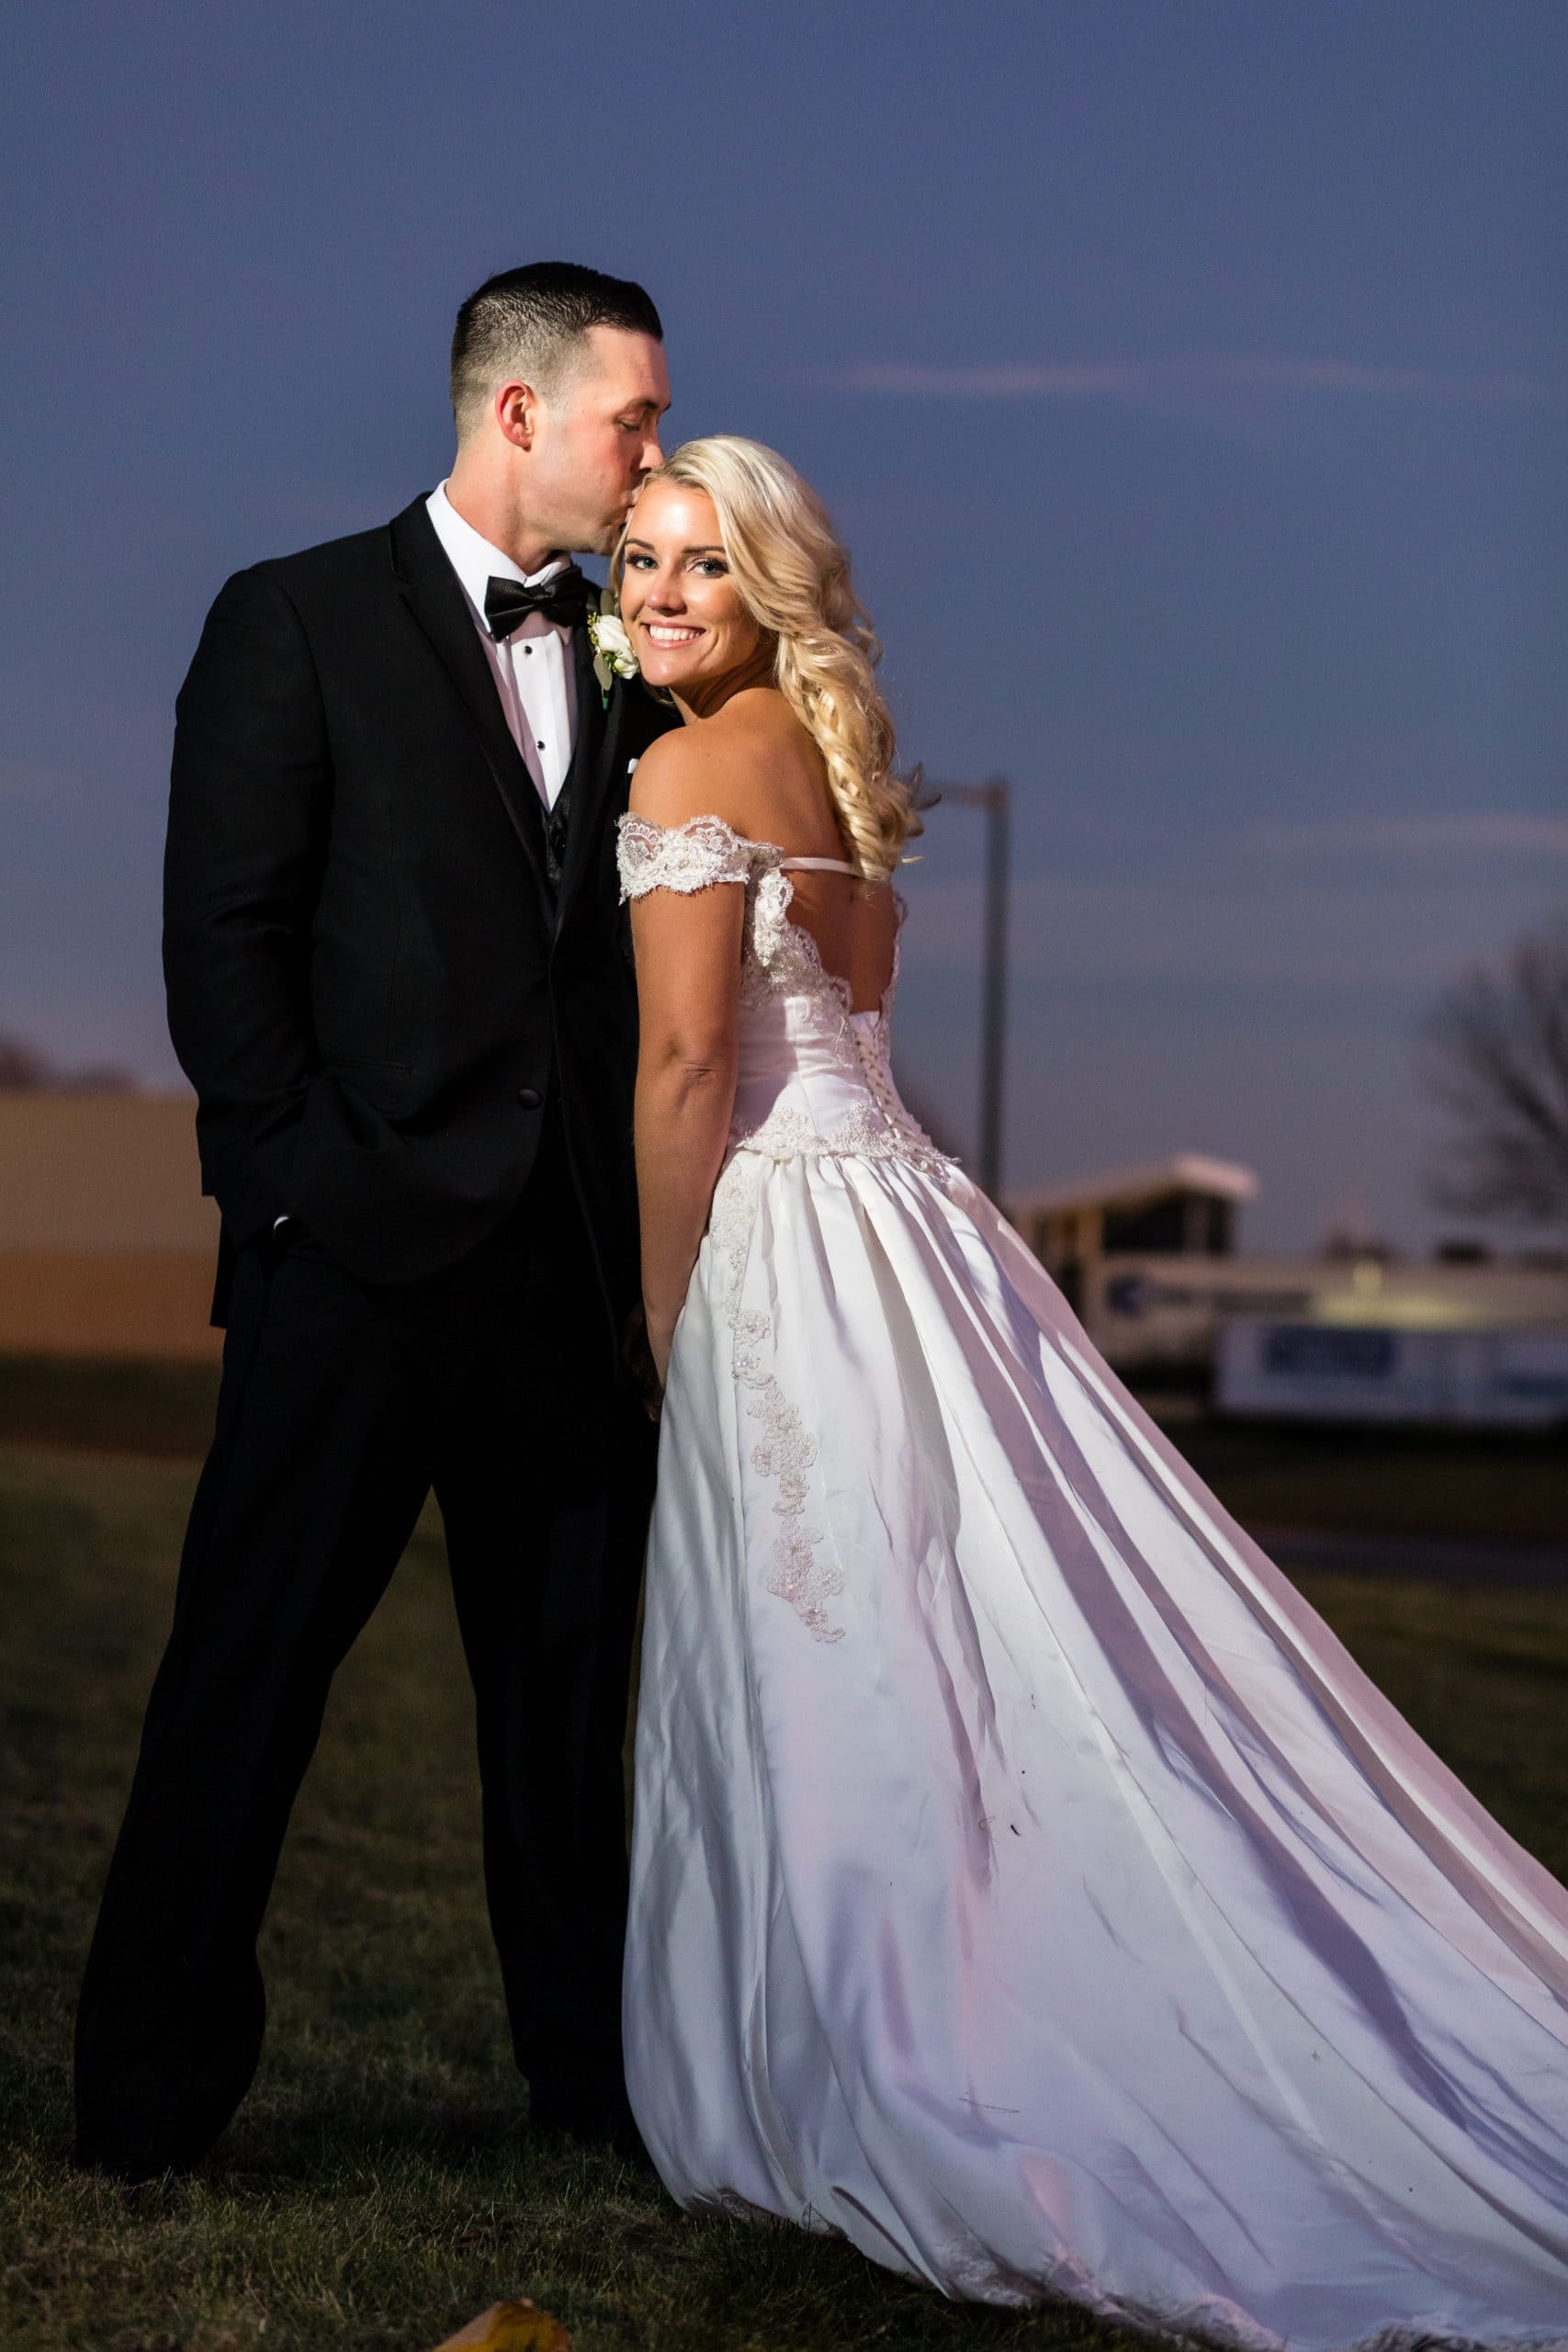 Wedding: Burch and Lutz Marry (3/7/13)